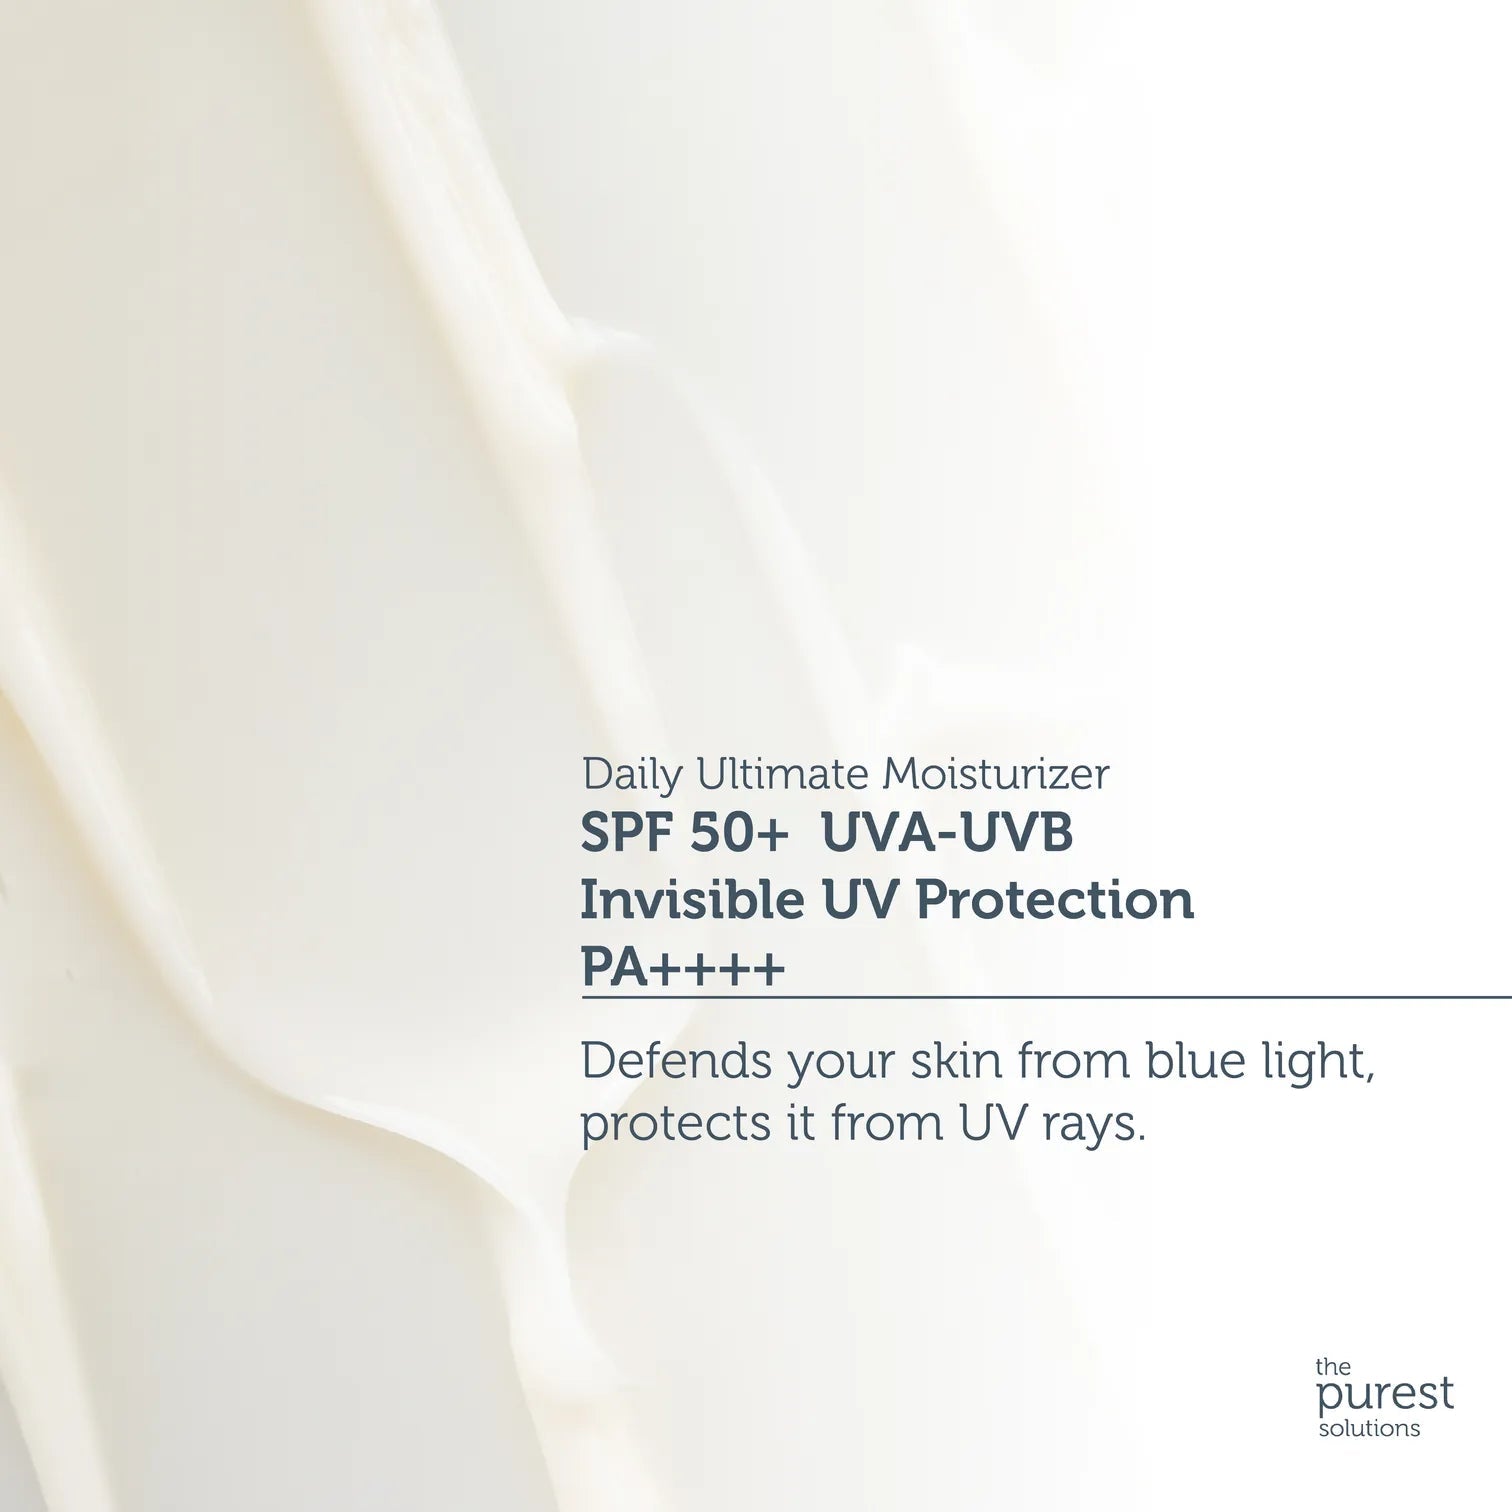 The Purest Solutions Daily Ultimate Moisturizer 50+ SPF - Invisible UV Protection Minoustore